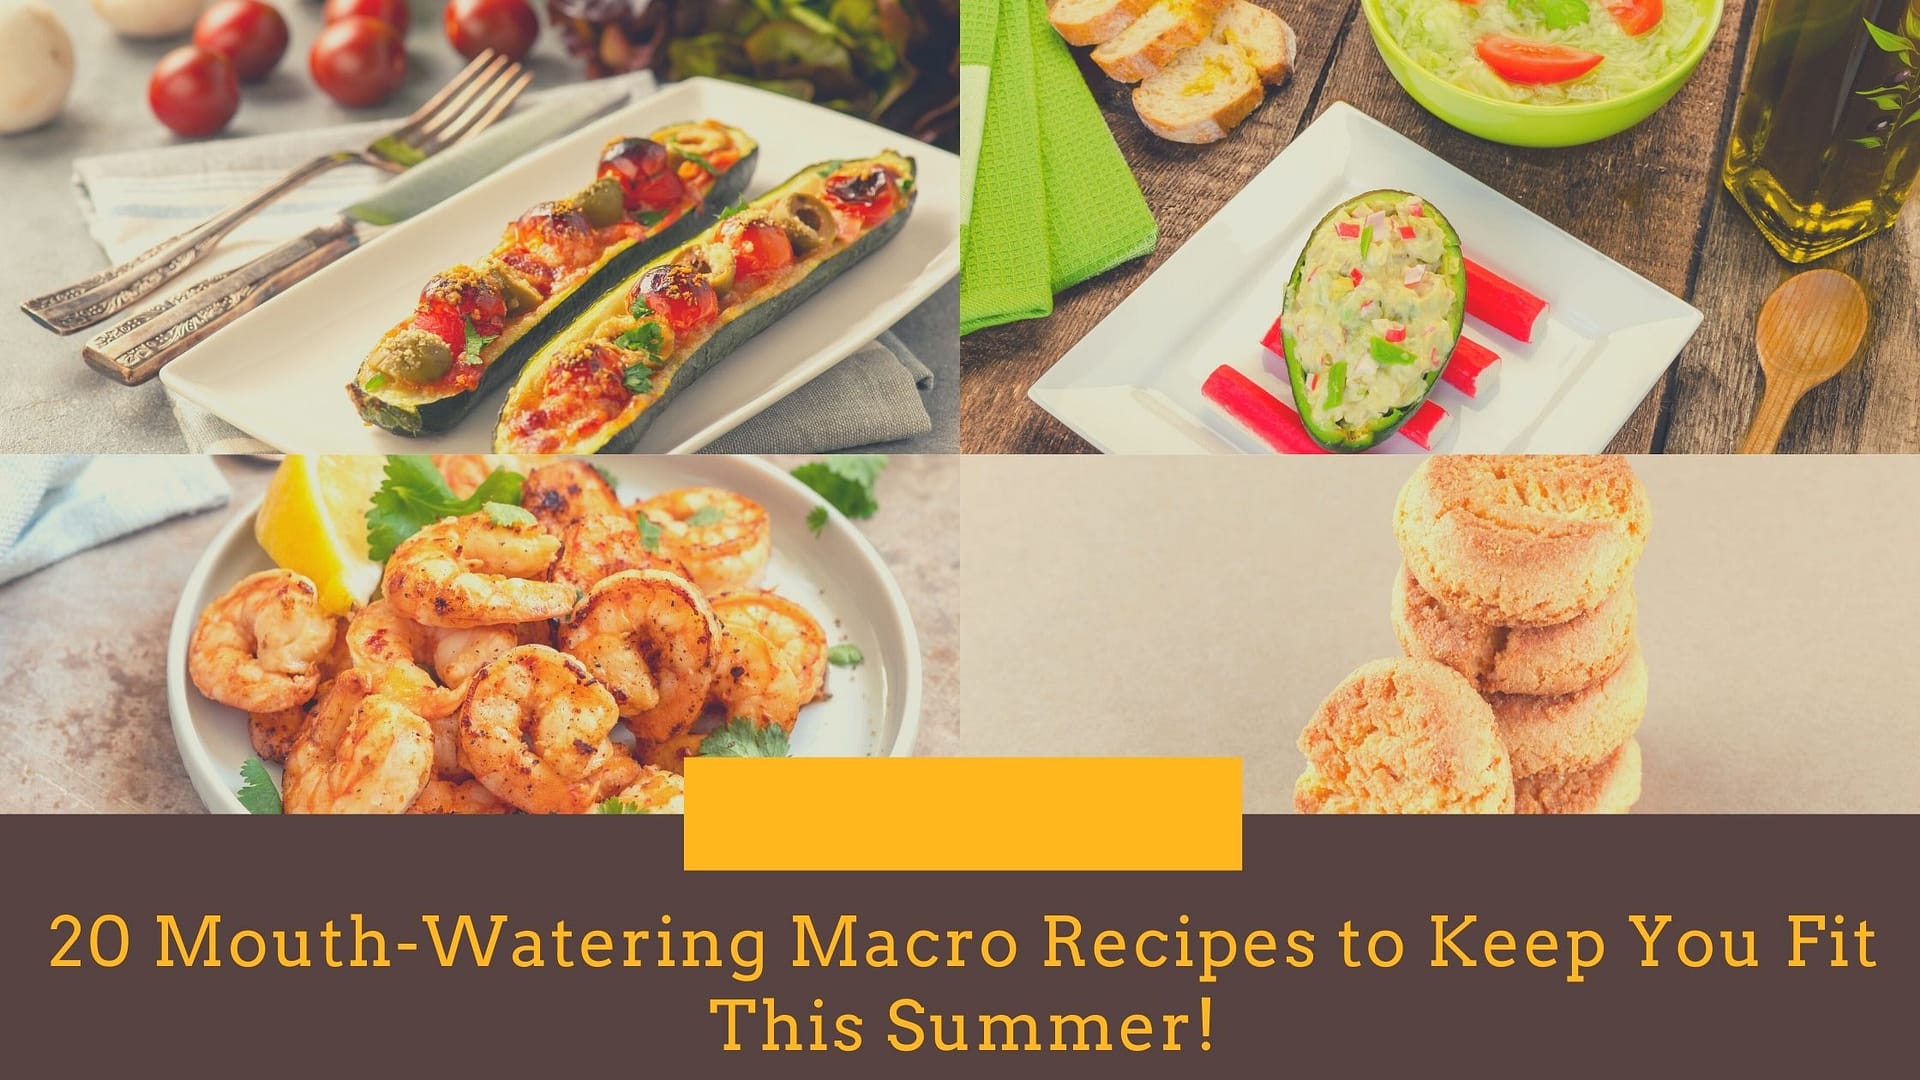 20 Mouth-Watering Macro Recipes to Keep You Fit This Summer